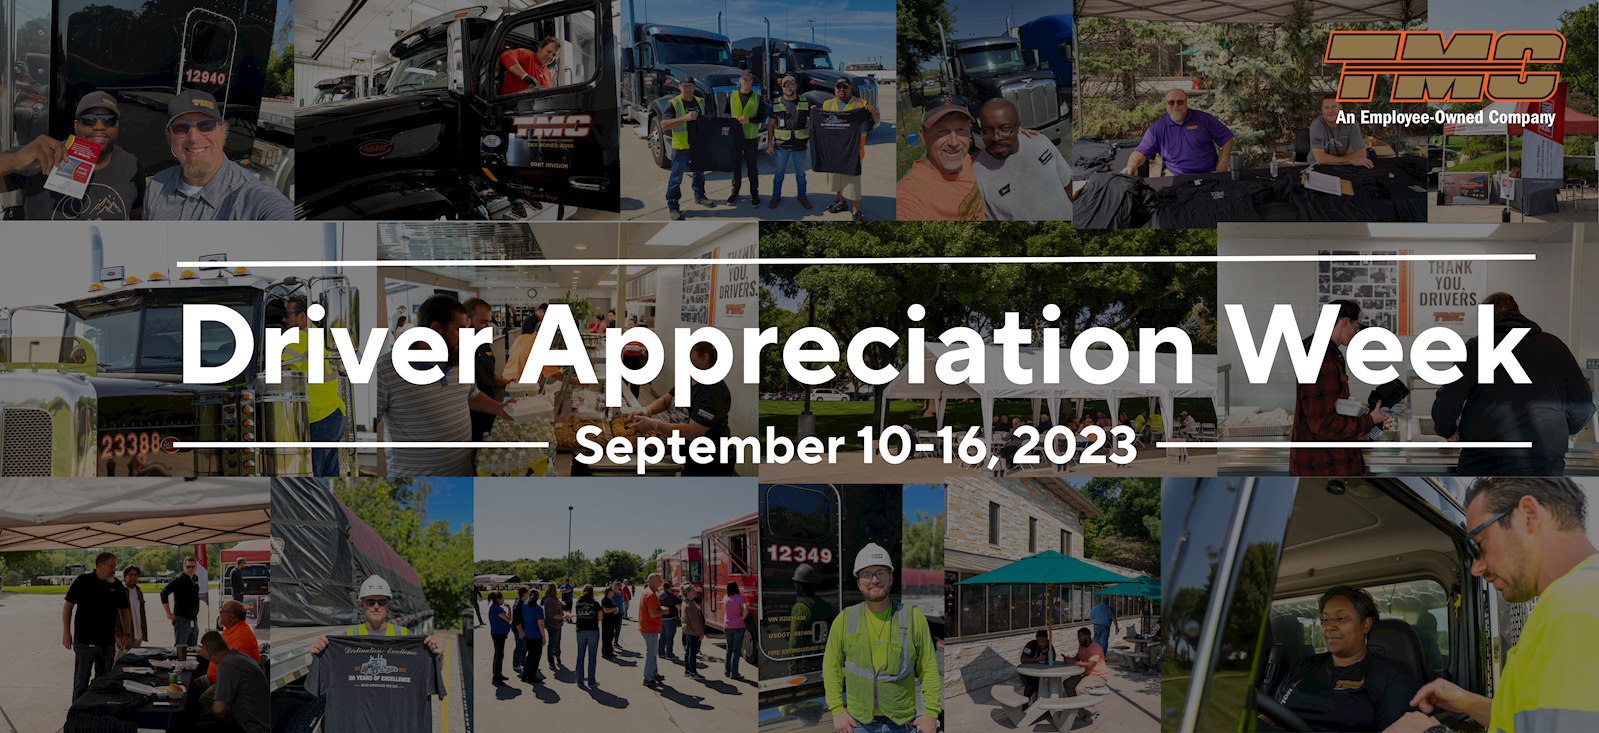 Are You Ready for Driver Appreciation Week?